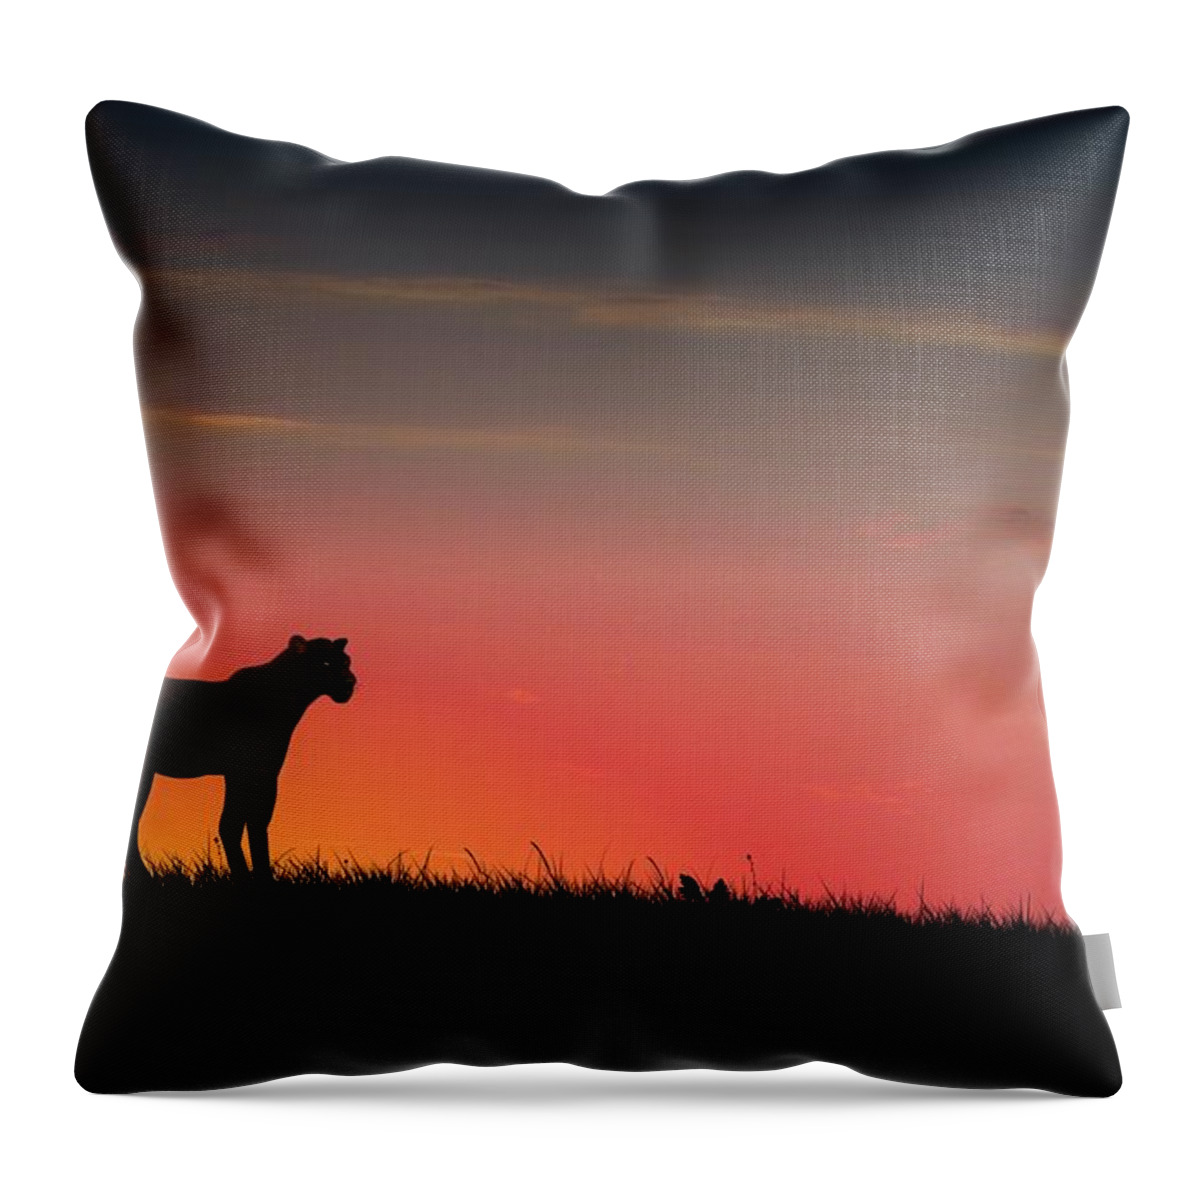 Black Panther Throw Pillow featuring the digital art Black Panther by John Wills